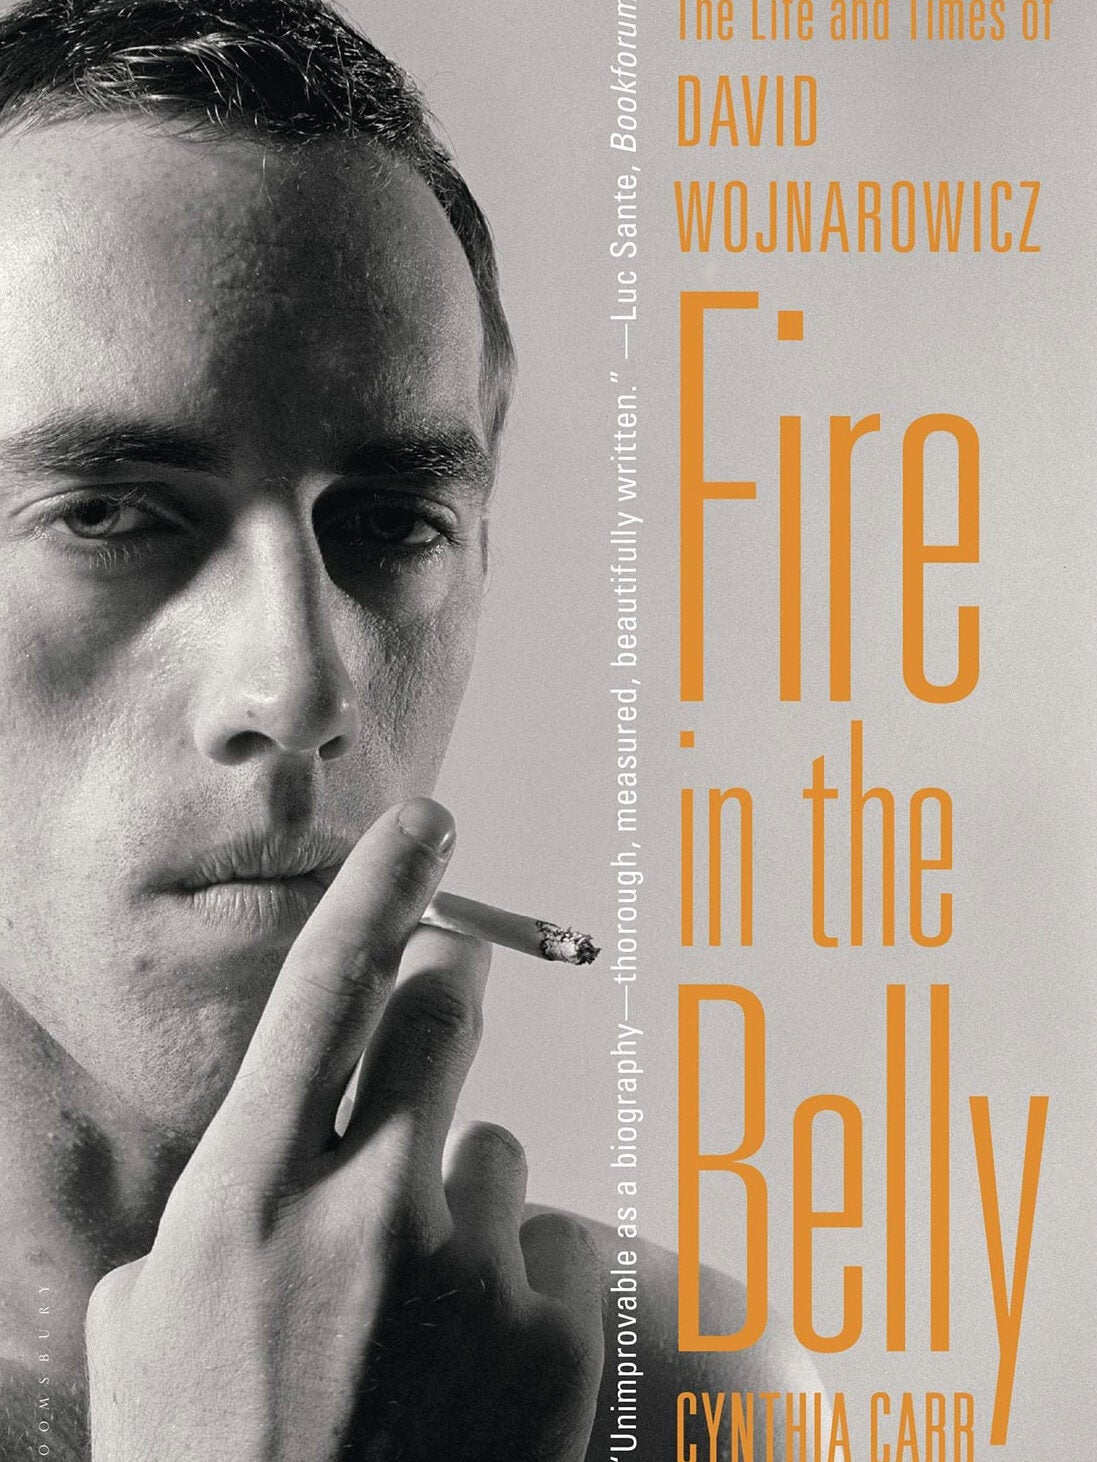 Fire in the Belly,’ Cynthia Carr’s towering biography of the artist David Wojnarowicz.